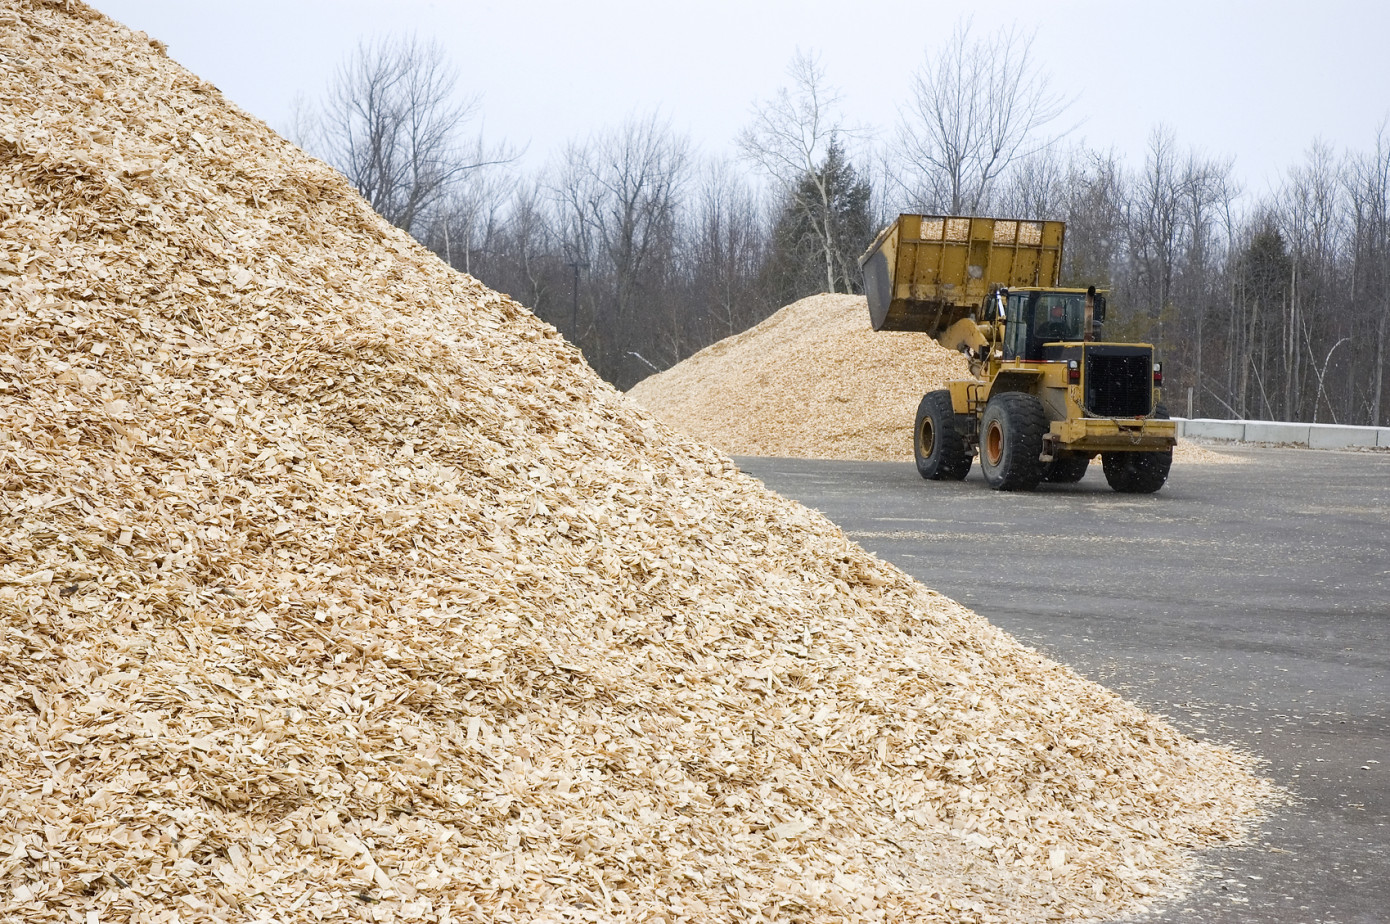 Global wood chip trade increased by 50% in 2009-2020